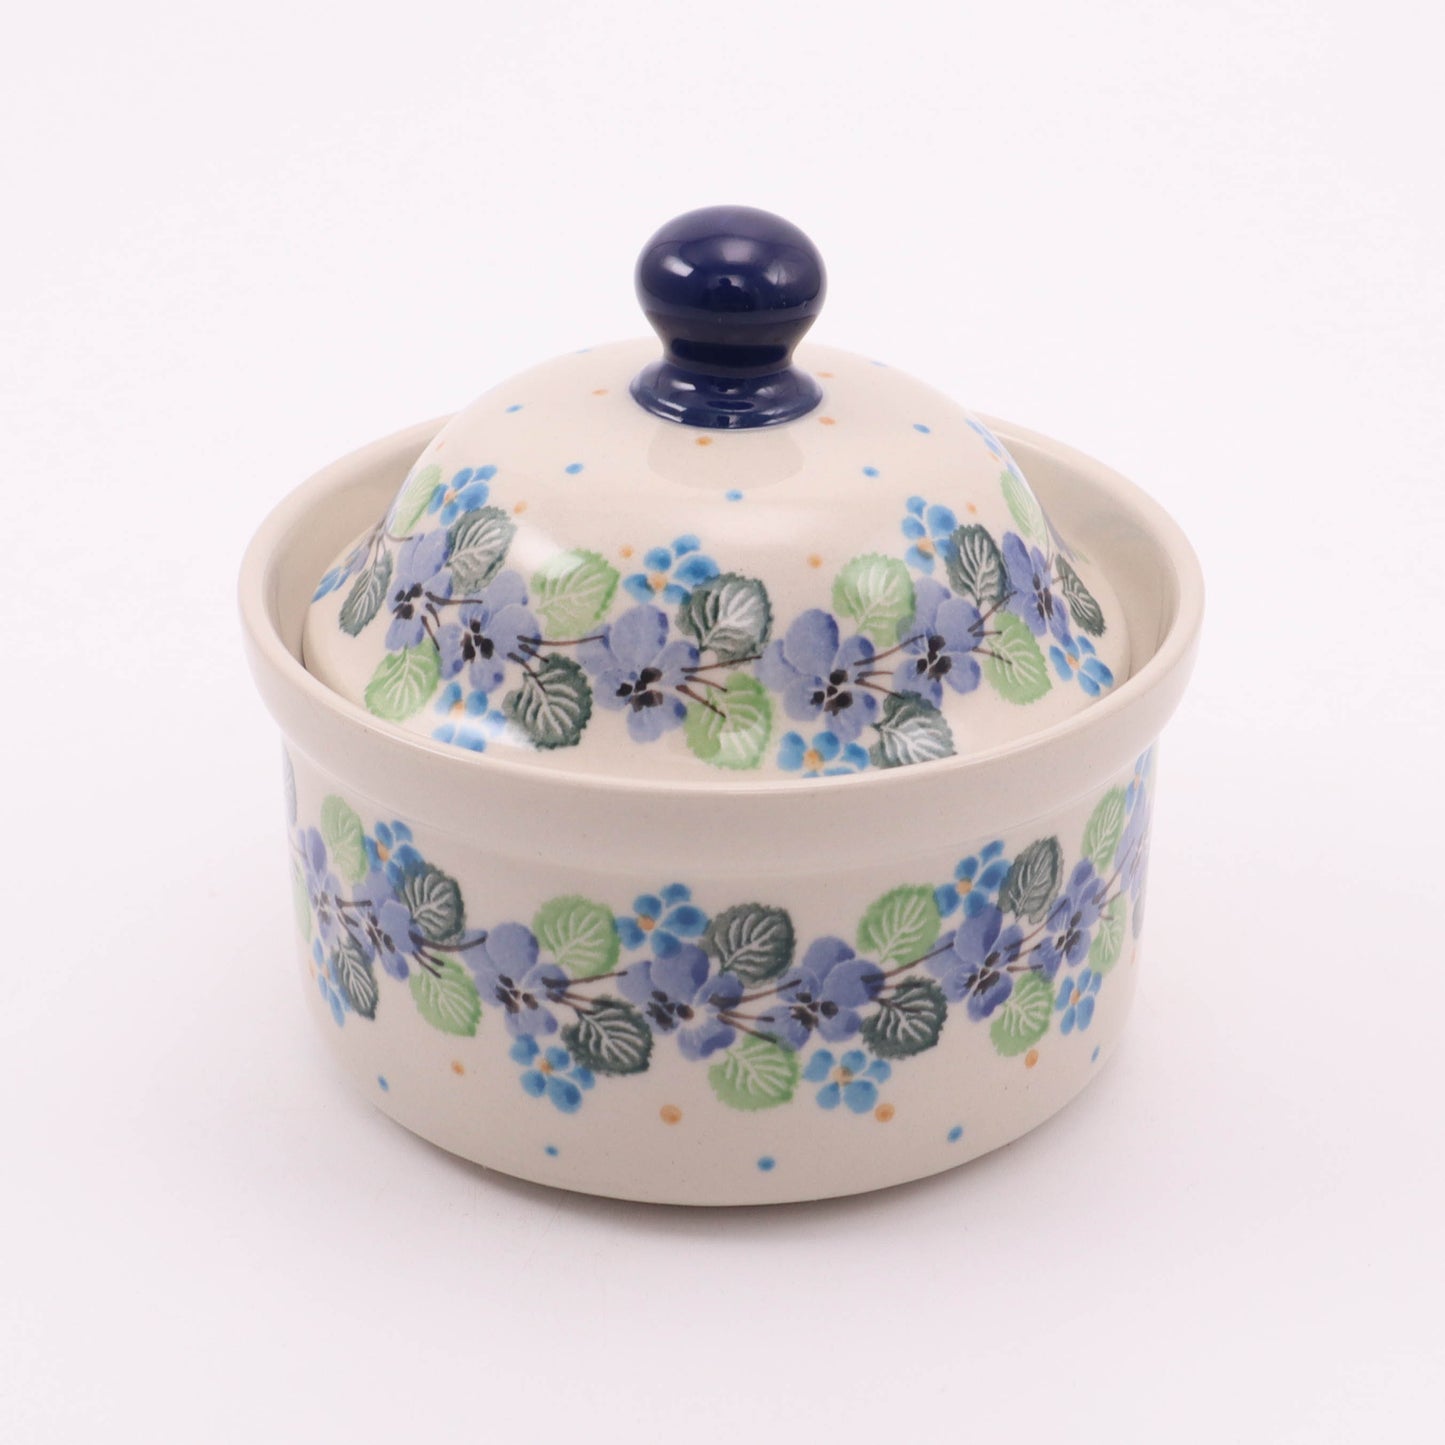 4"x5" Round Covered Dish. Pattern: Classic Blooms